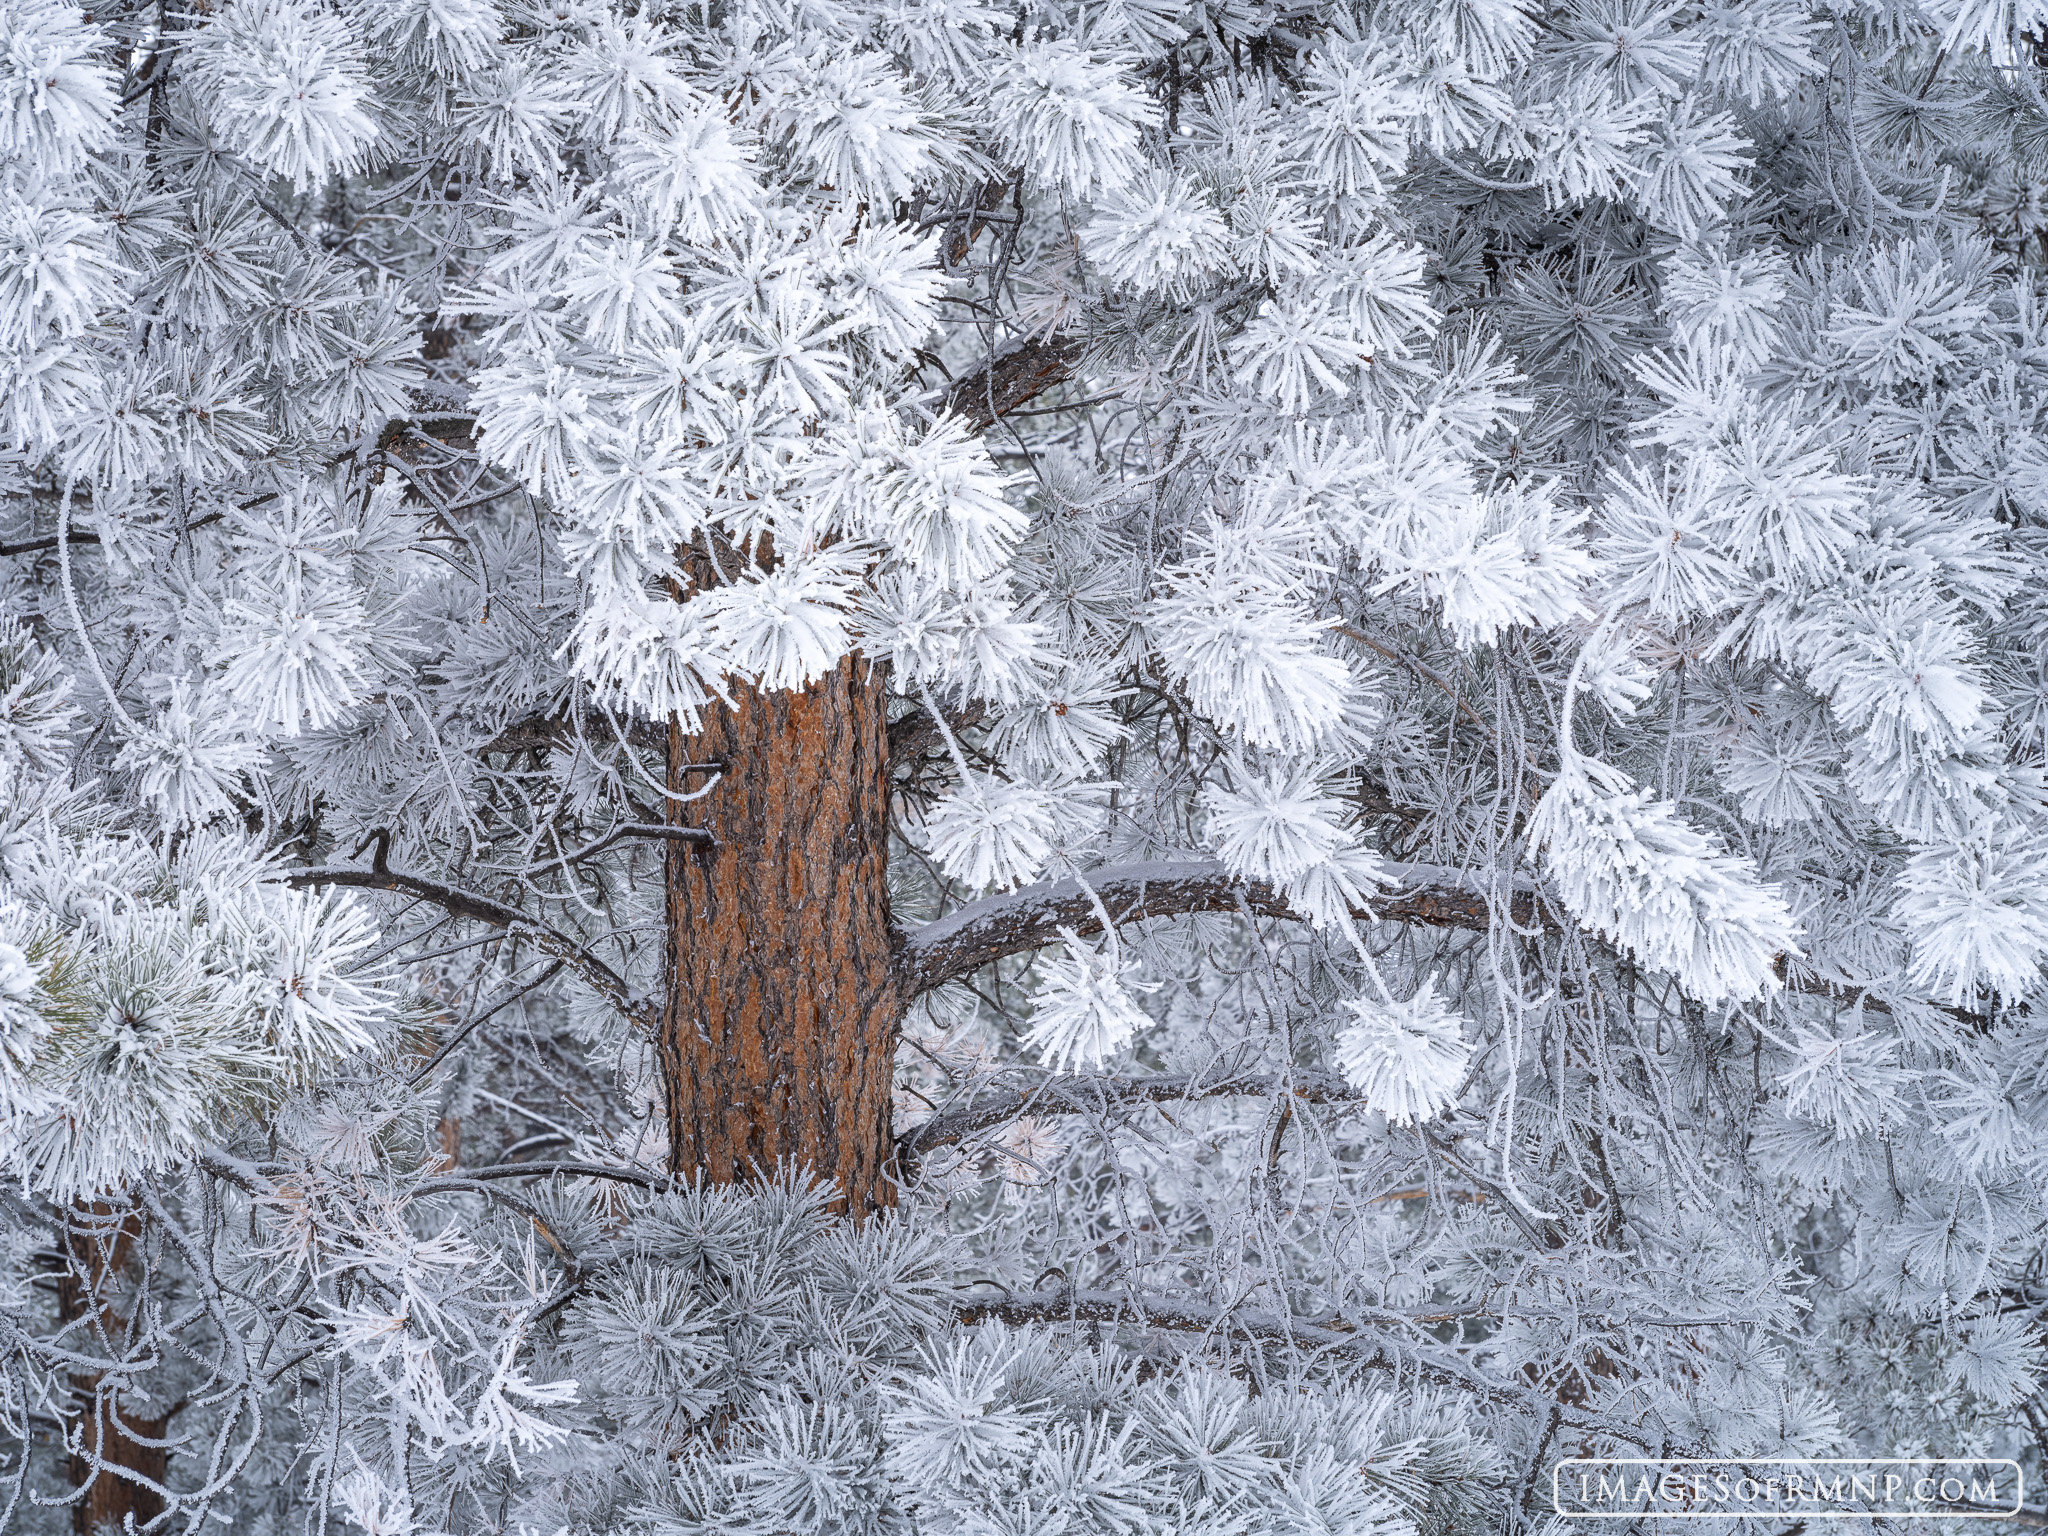 An ice storm moved through Rocky Mountain National Park covering the ponderosa forest in a thick layer of frost. For a few hours...